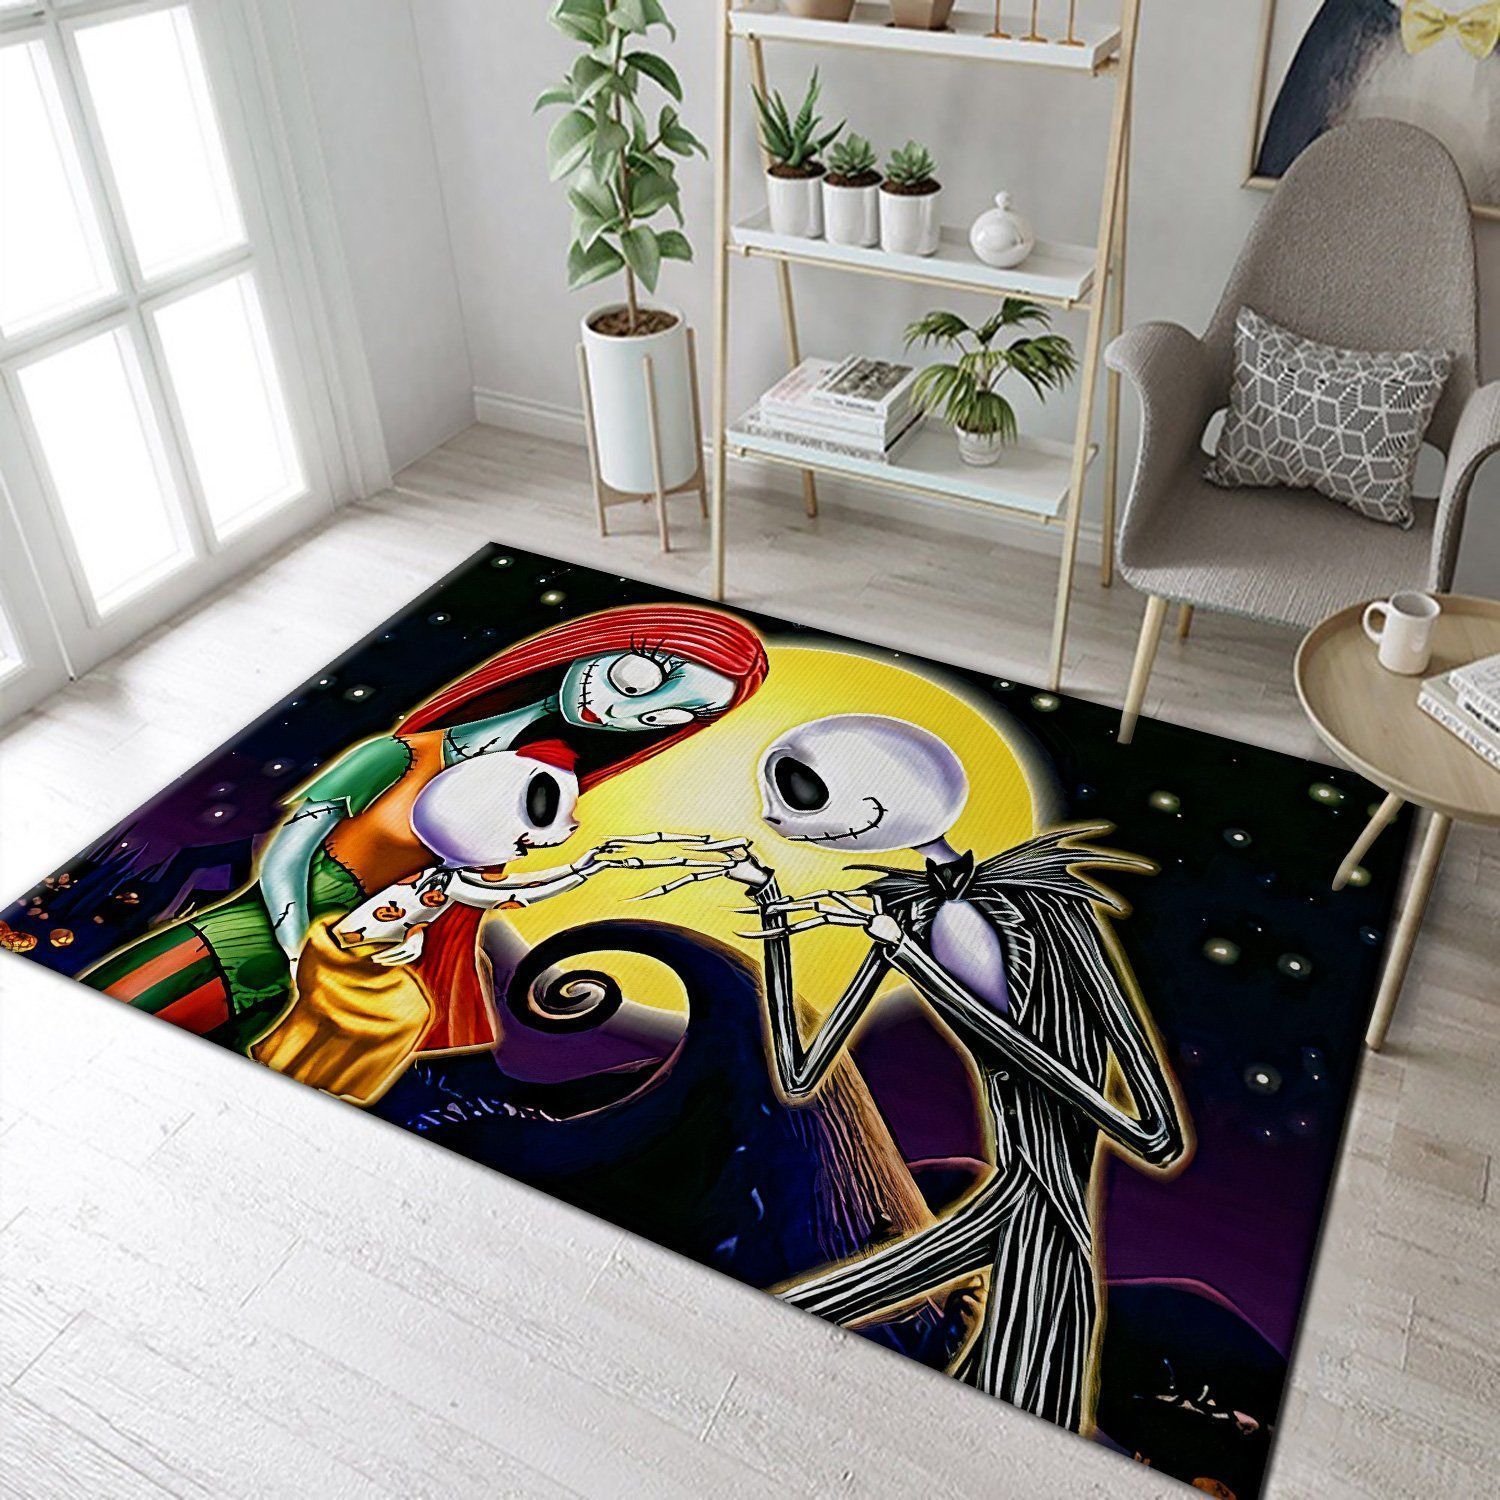 The nightmare before christmas Jack skellington family Area rug The US Decor - Indoor Outdoor Rugs 2